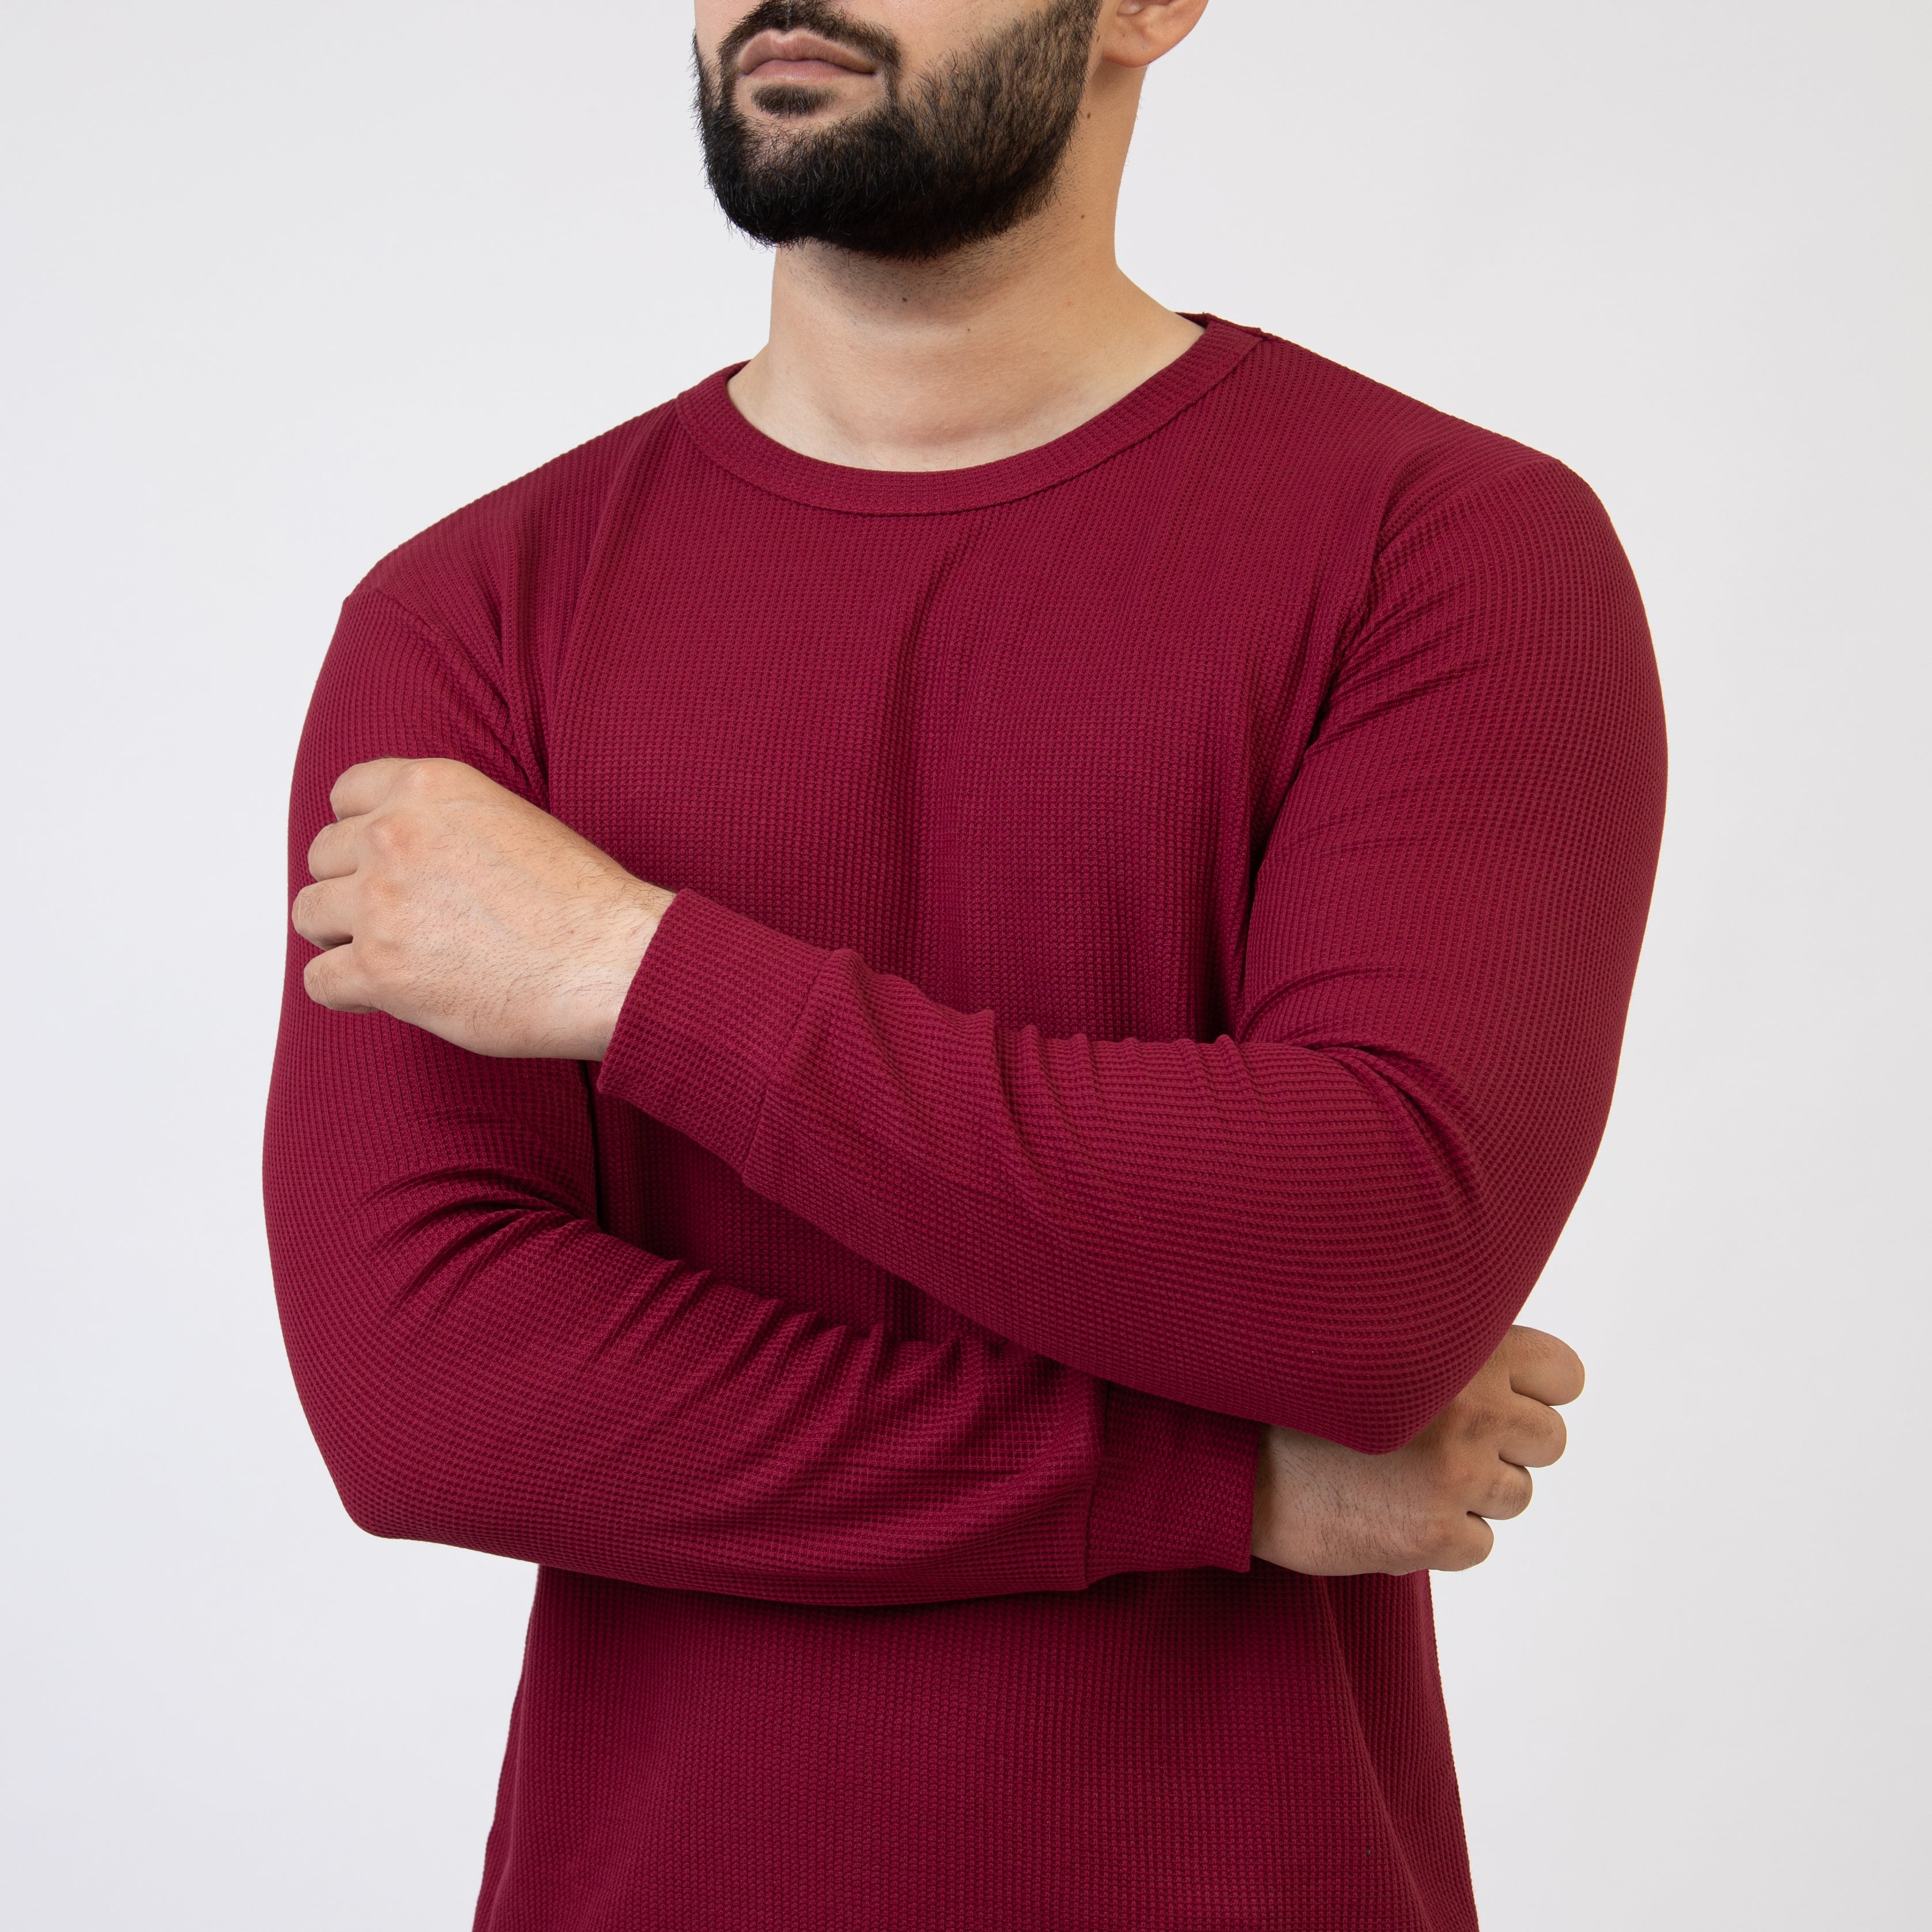 Men's Classic Fit Waffle-Knit Heavy Thermal Shirt (S, Burgundy) at